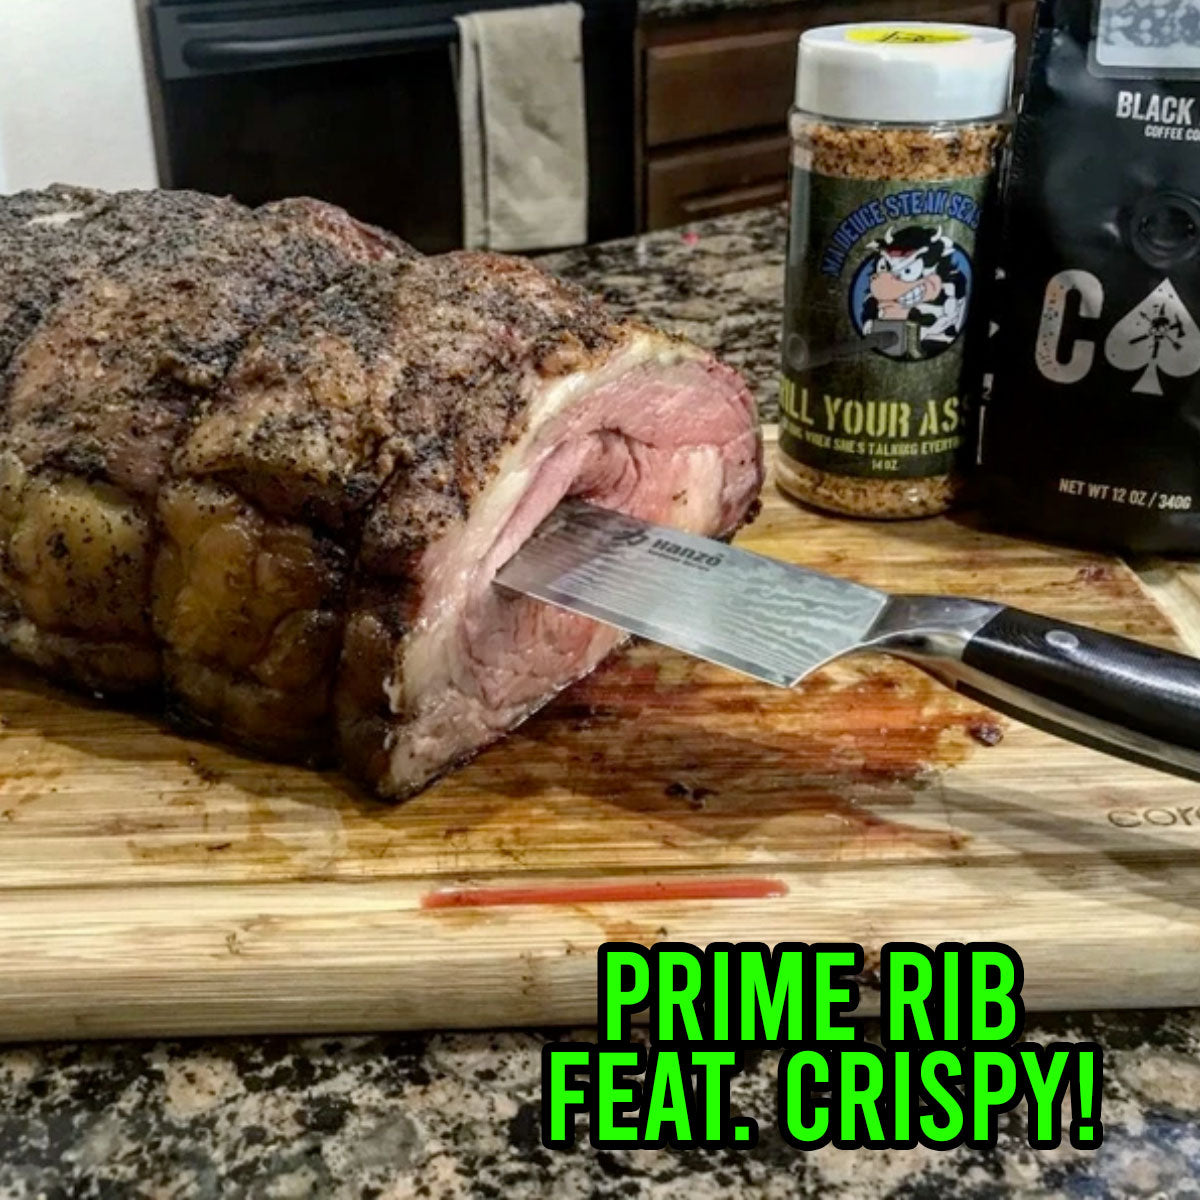 Prime Rib Feat. Crispy! | Grill Your Ass Off